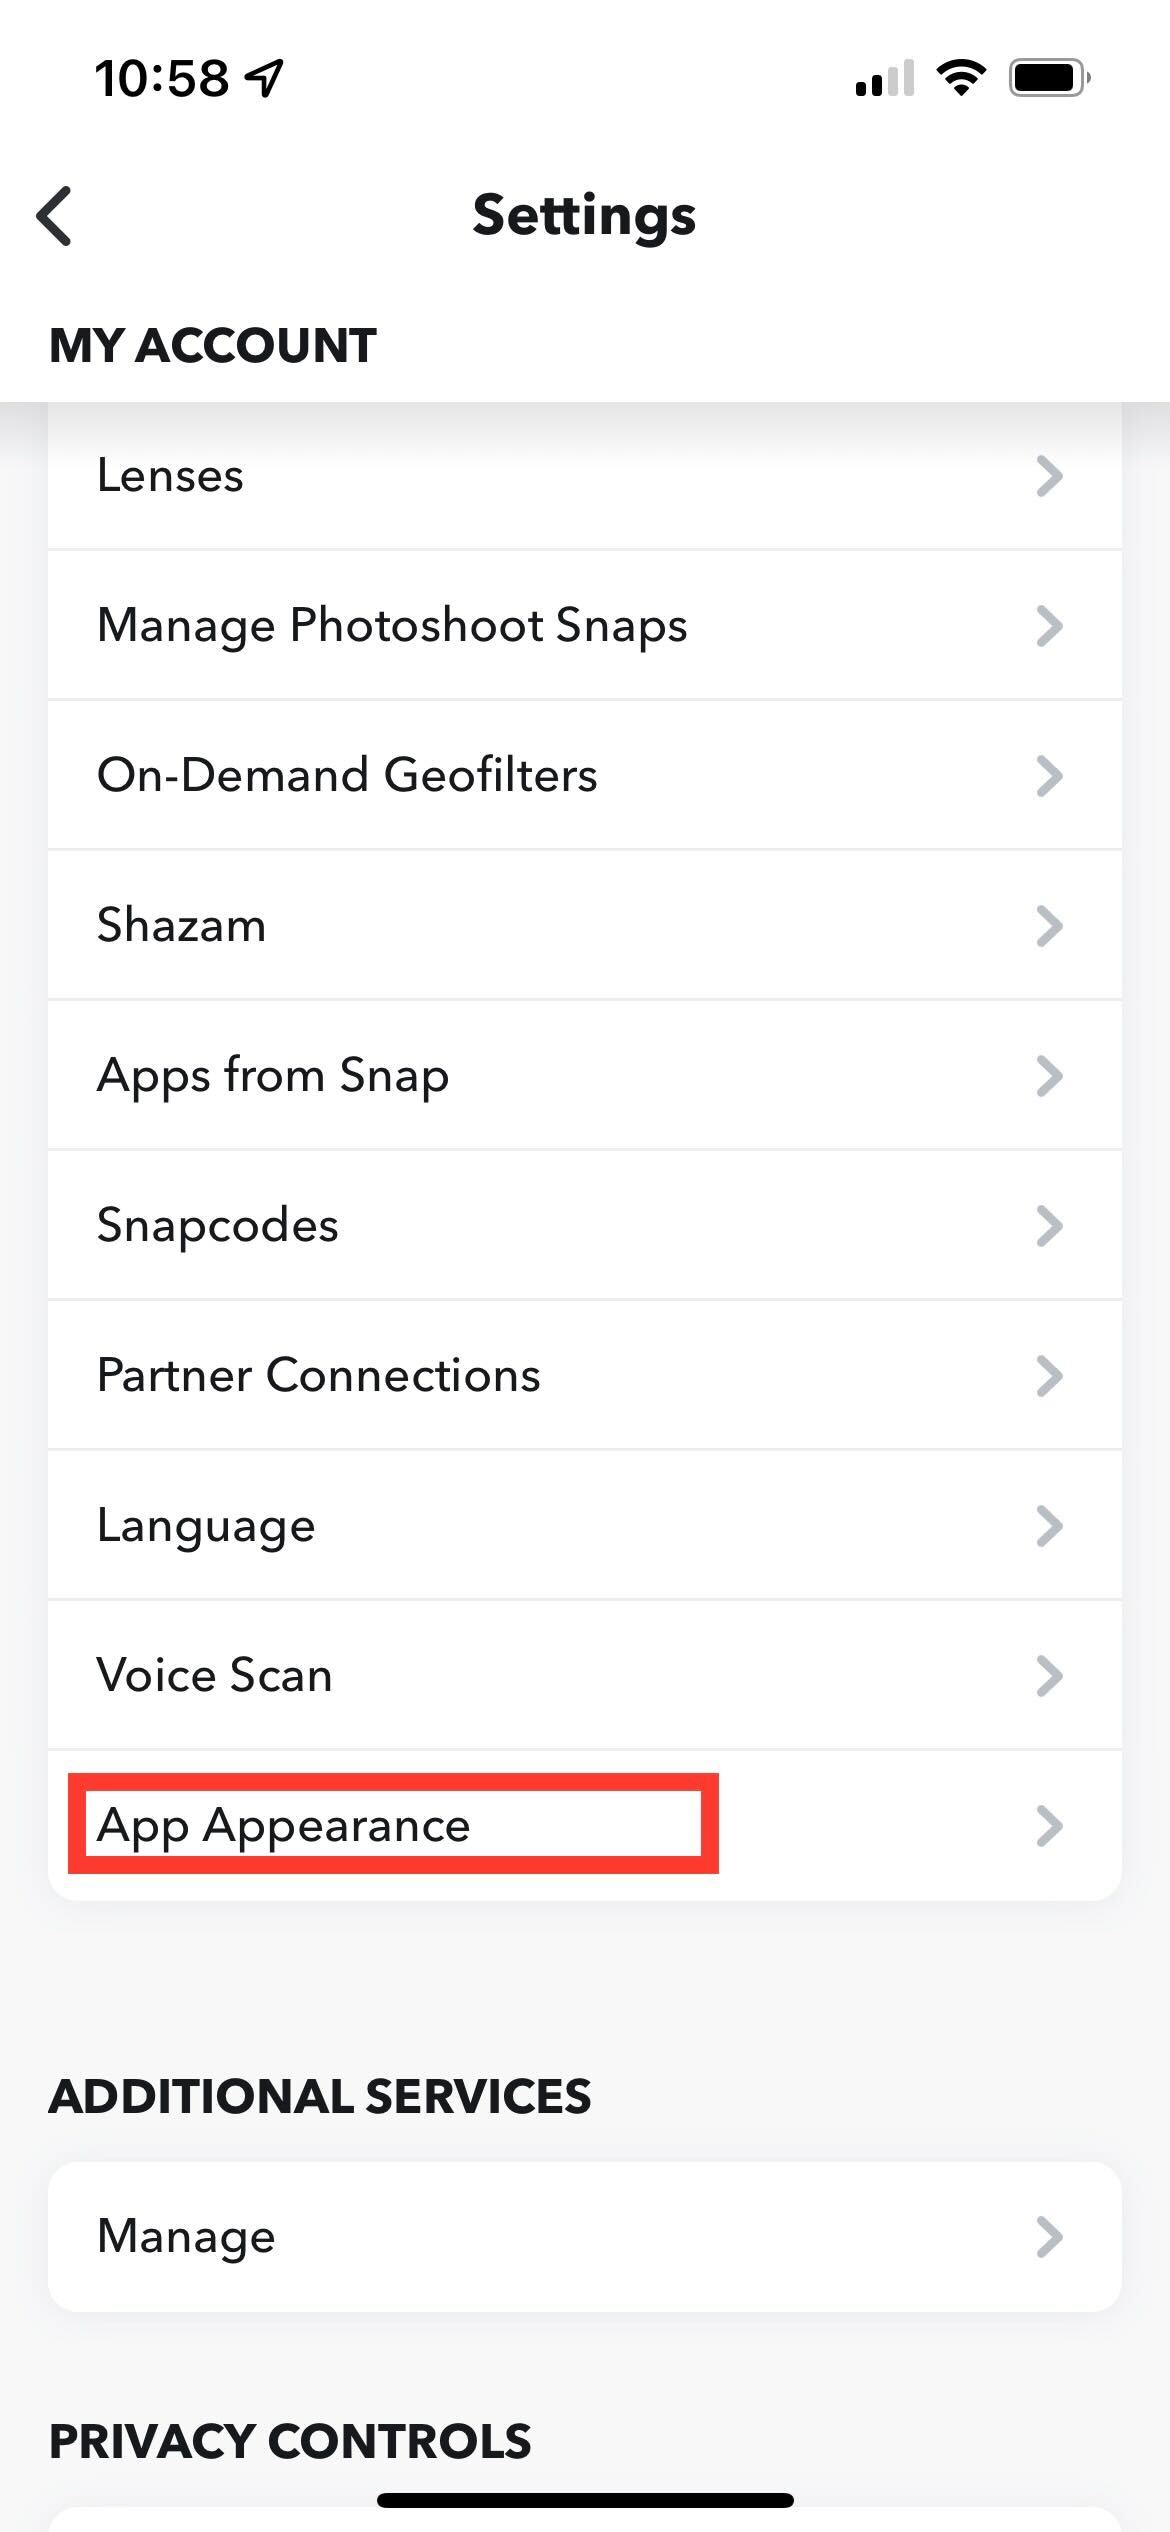 Click on App Appereance to keep going